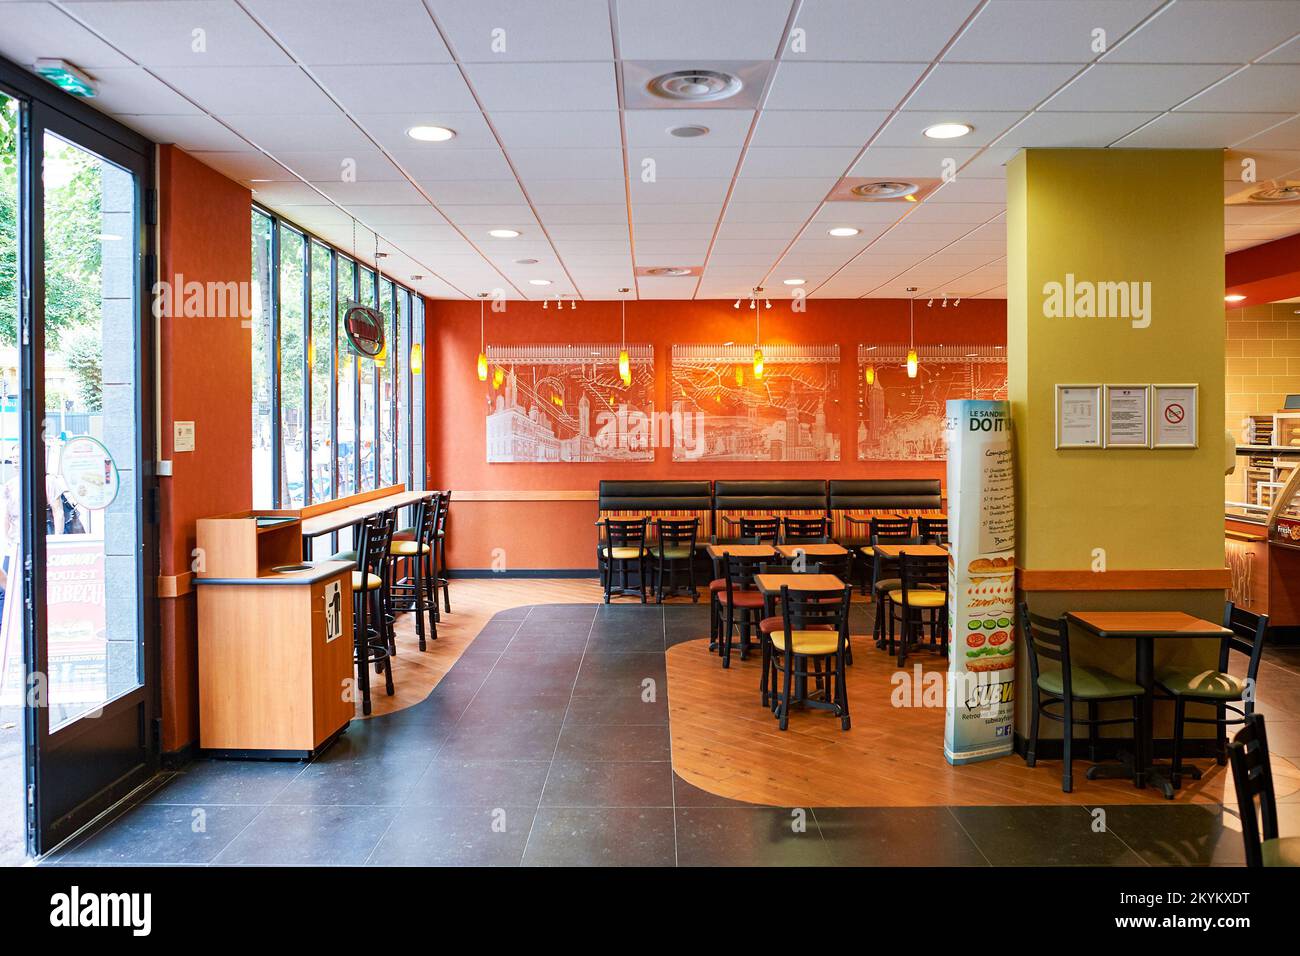 NICE, FRANCE - AUGUST 15, 2015: Subway fast food restaurant interior. Subway is an American fast food restaurant franchise that primarily sells submar Stock Photo